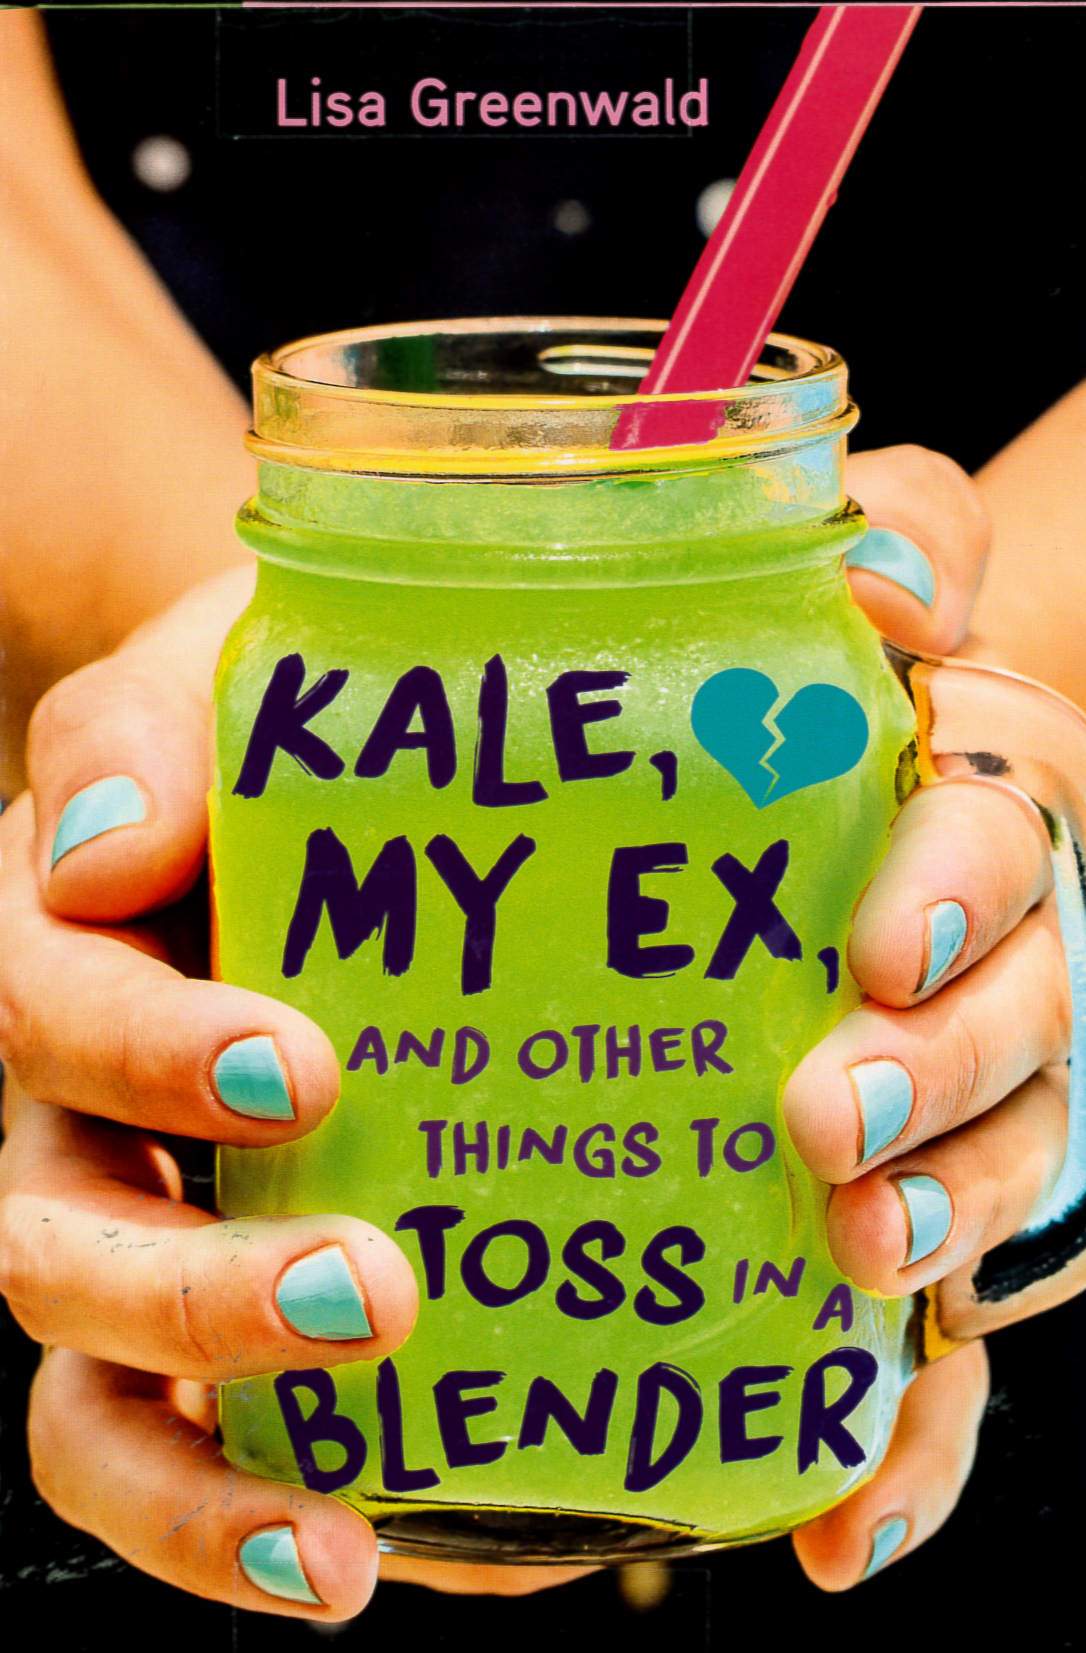 Kale, my ex, and other things to toss in a blender /